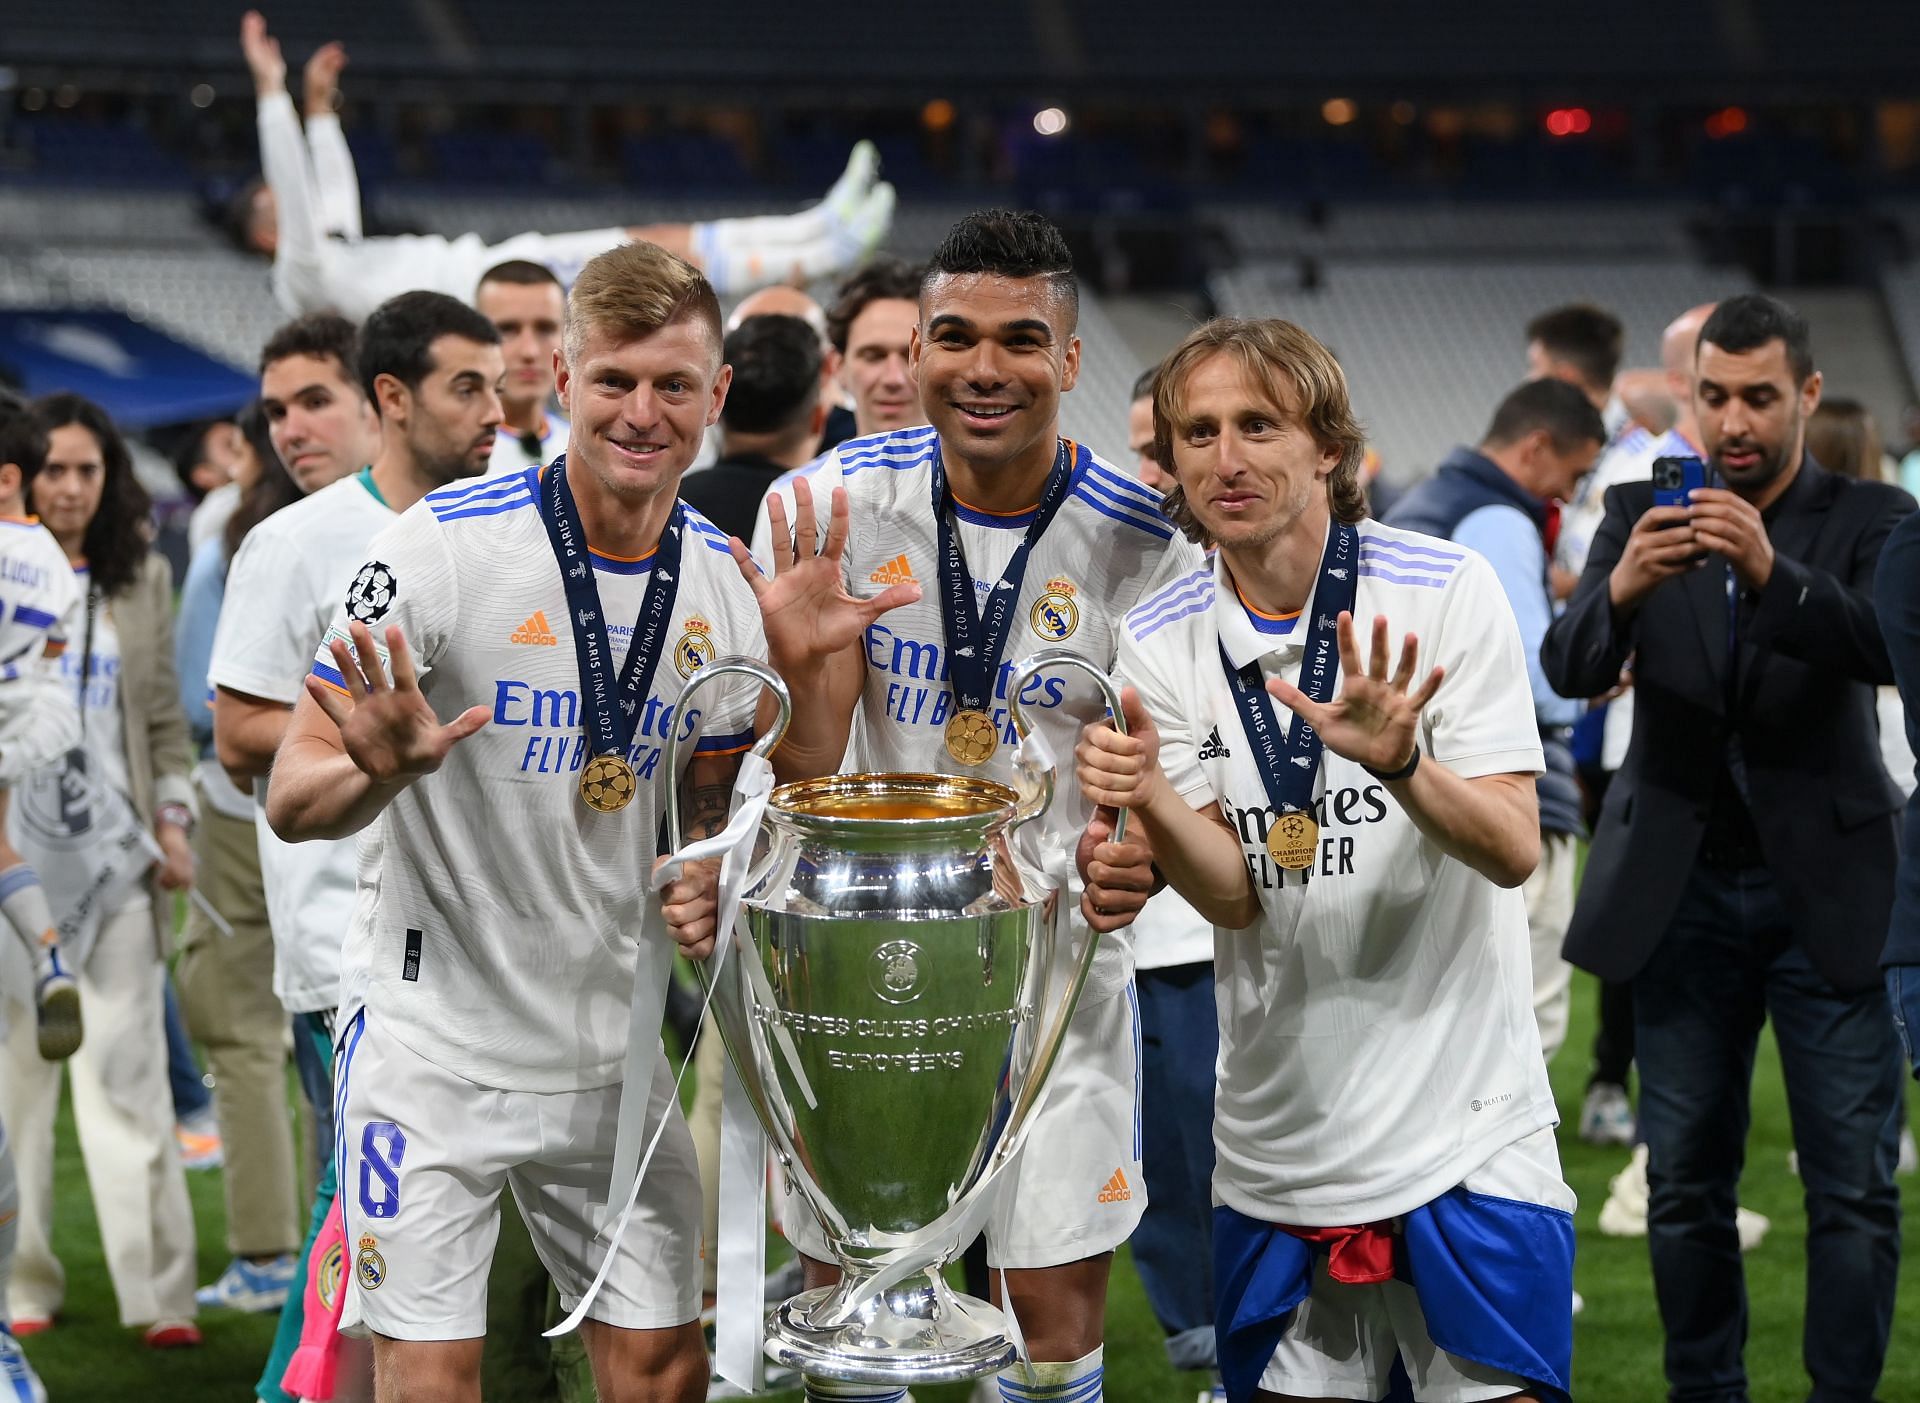 Real Madrid are European champions for the 14th time.